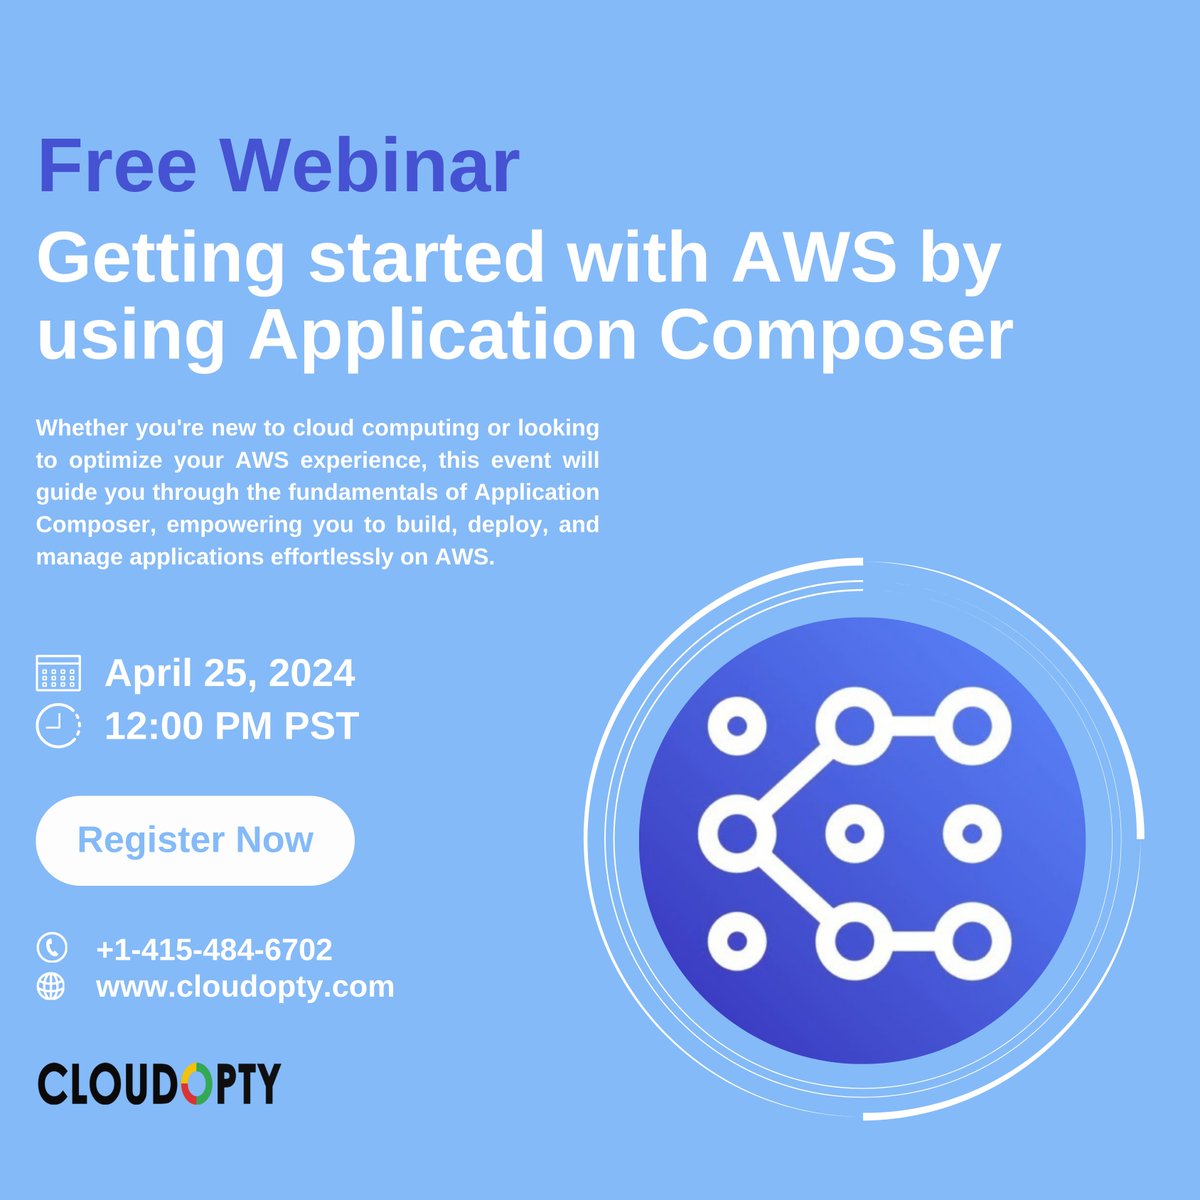 Join us for an insightful session on getting started with AWS using Application Composer. 📅April 25th, 2024 🕒 12pm PST meetup.com/big-data-ai-10… #cloudcomputing #cloudsecurity #cloudoptimization #cloudcomputingservices #cloudopty #webinar #freewebinar #AWS #applicationcomposer